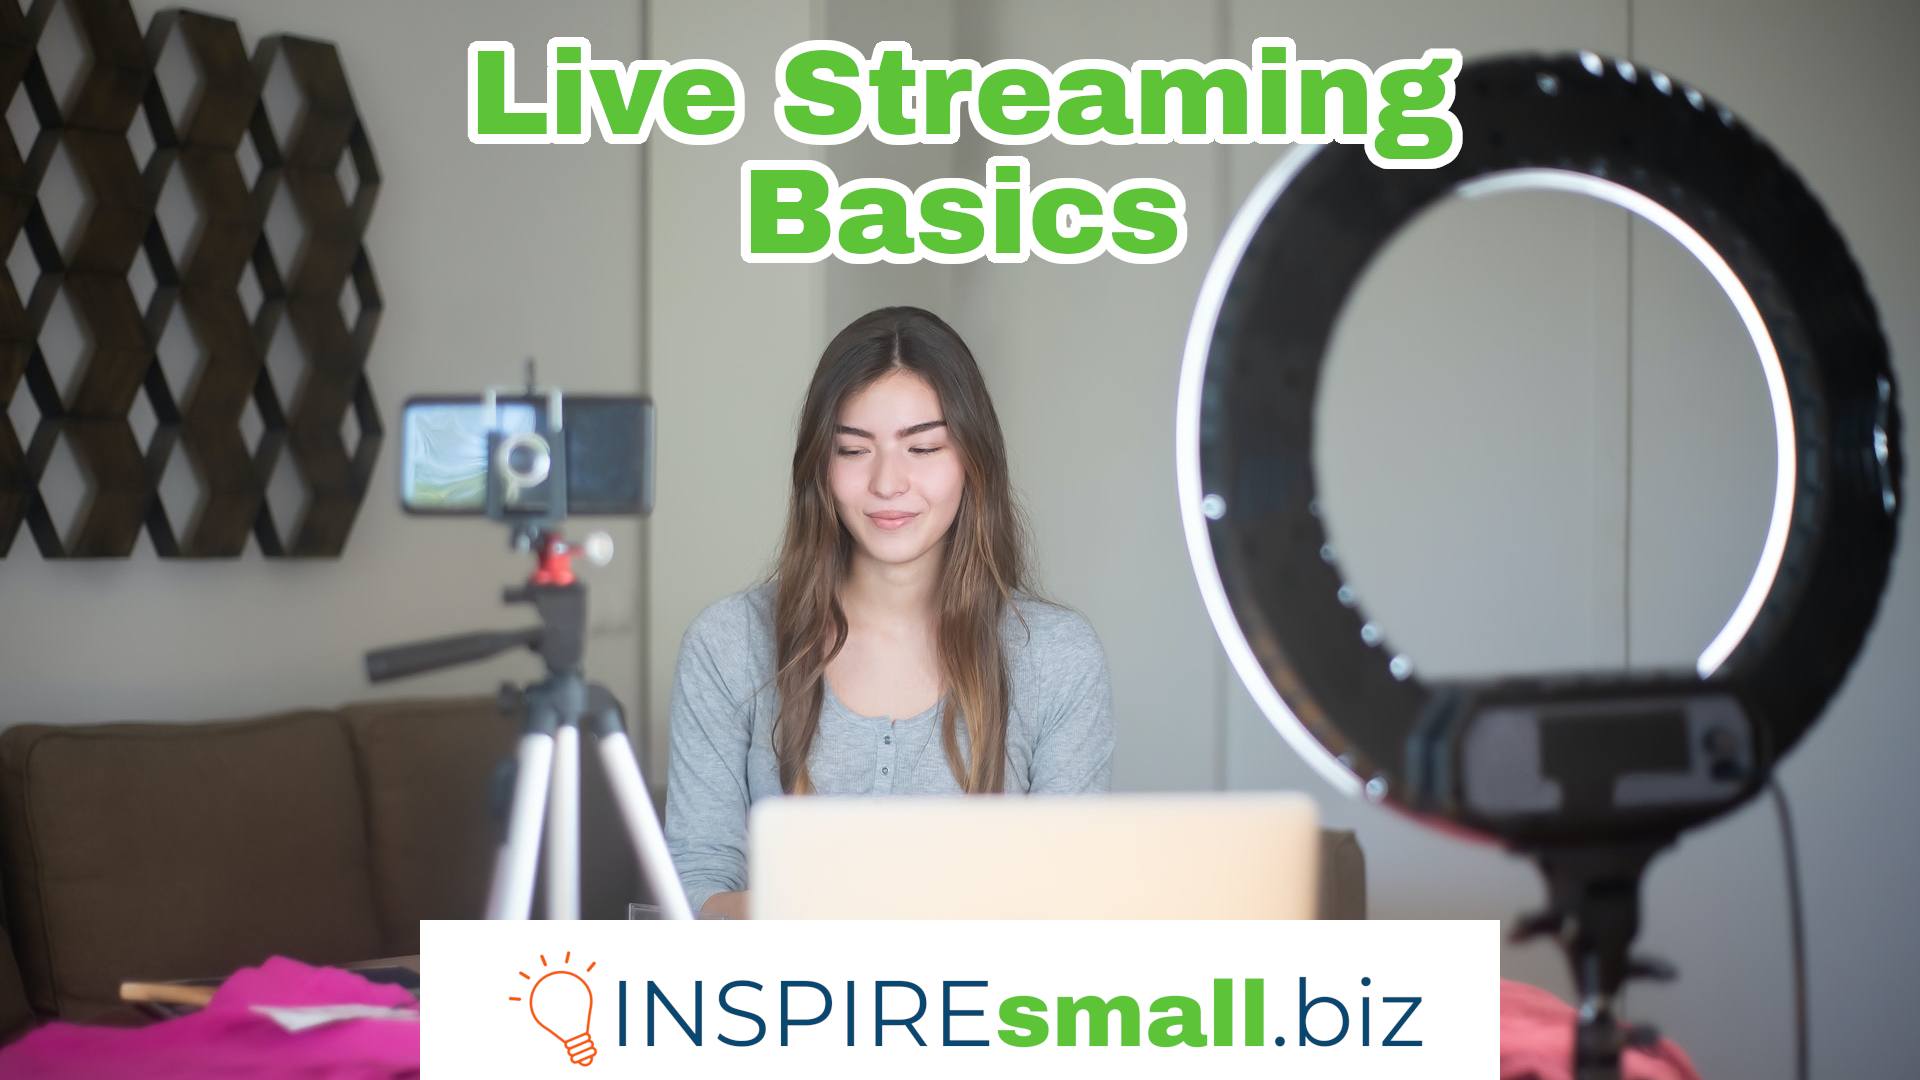 A live streamer in front of a camera and light. Text reads Live Streaming Basics workshop from INSPIREsmall.biz